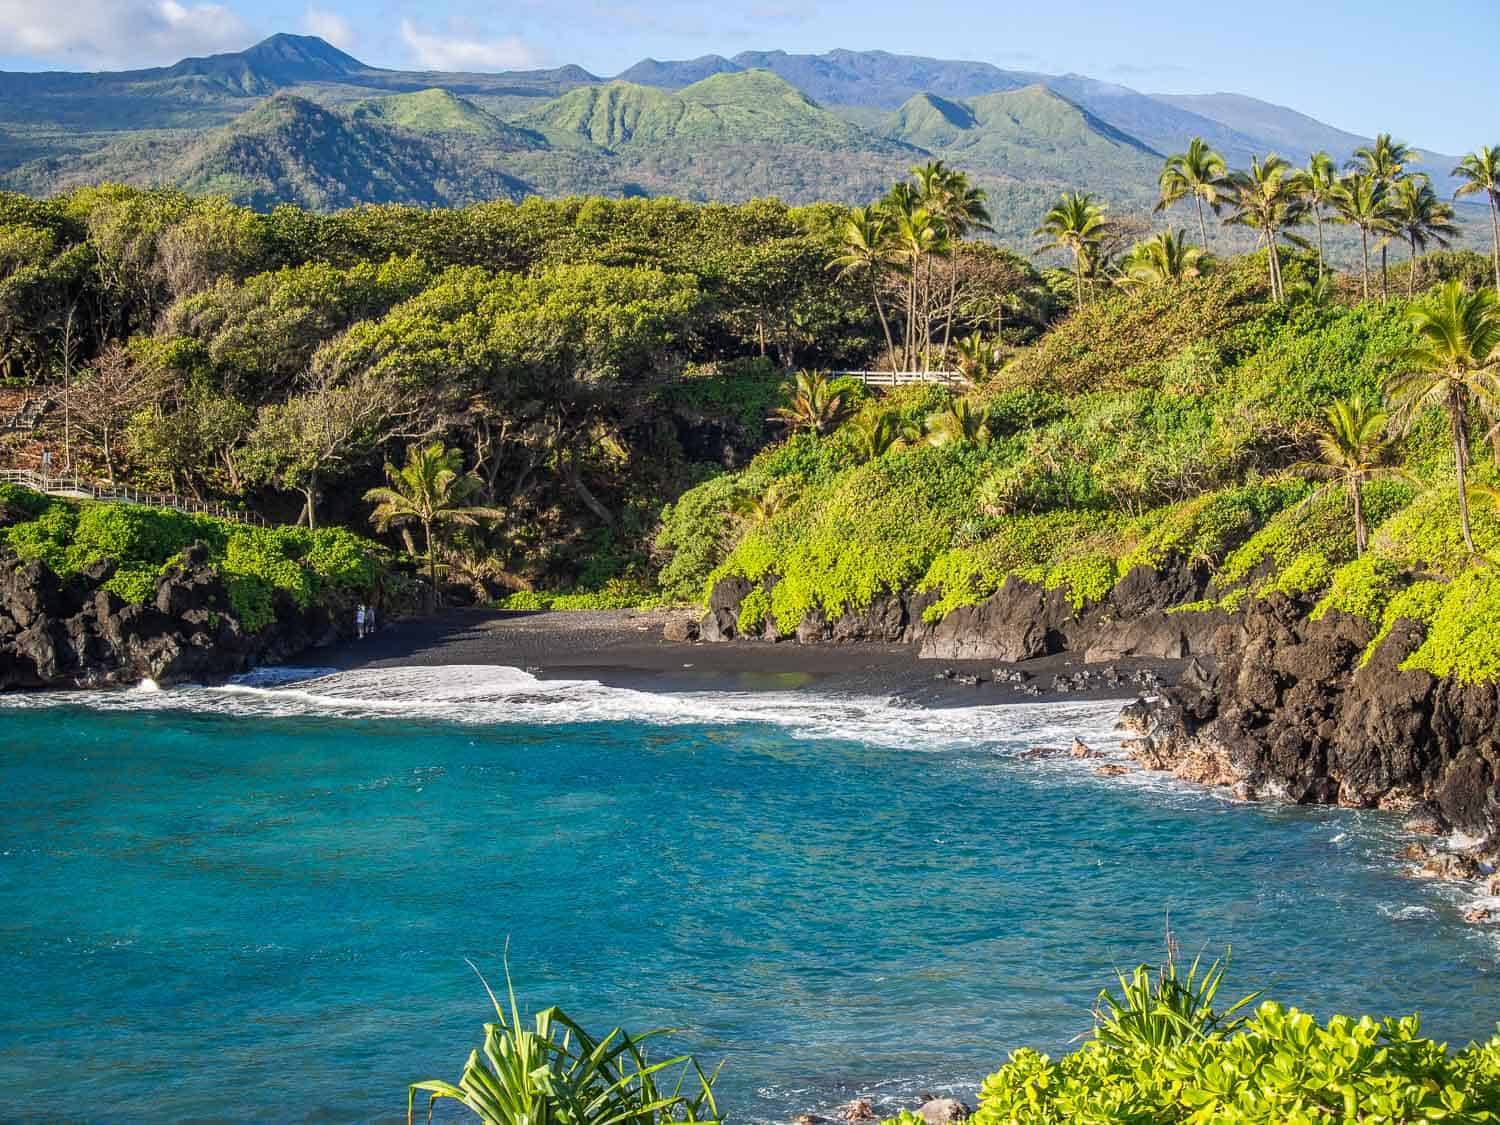 The black sand beach at Waianapanapa State Park is a highlight of a Maui itinerary